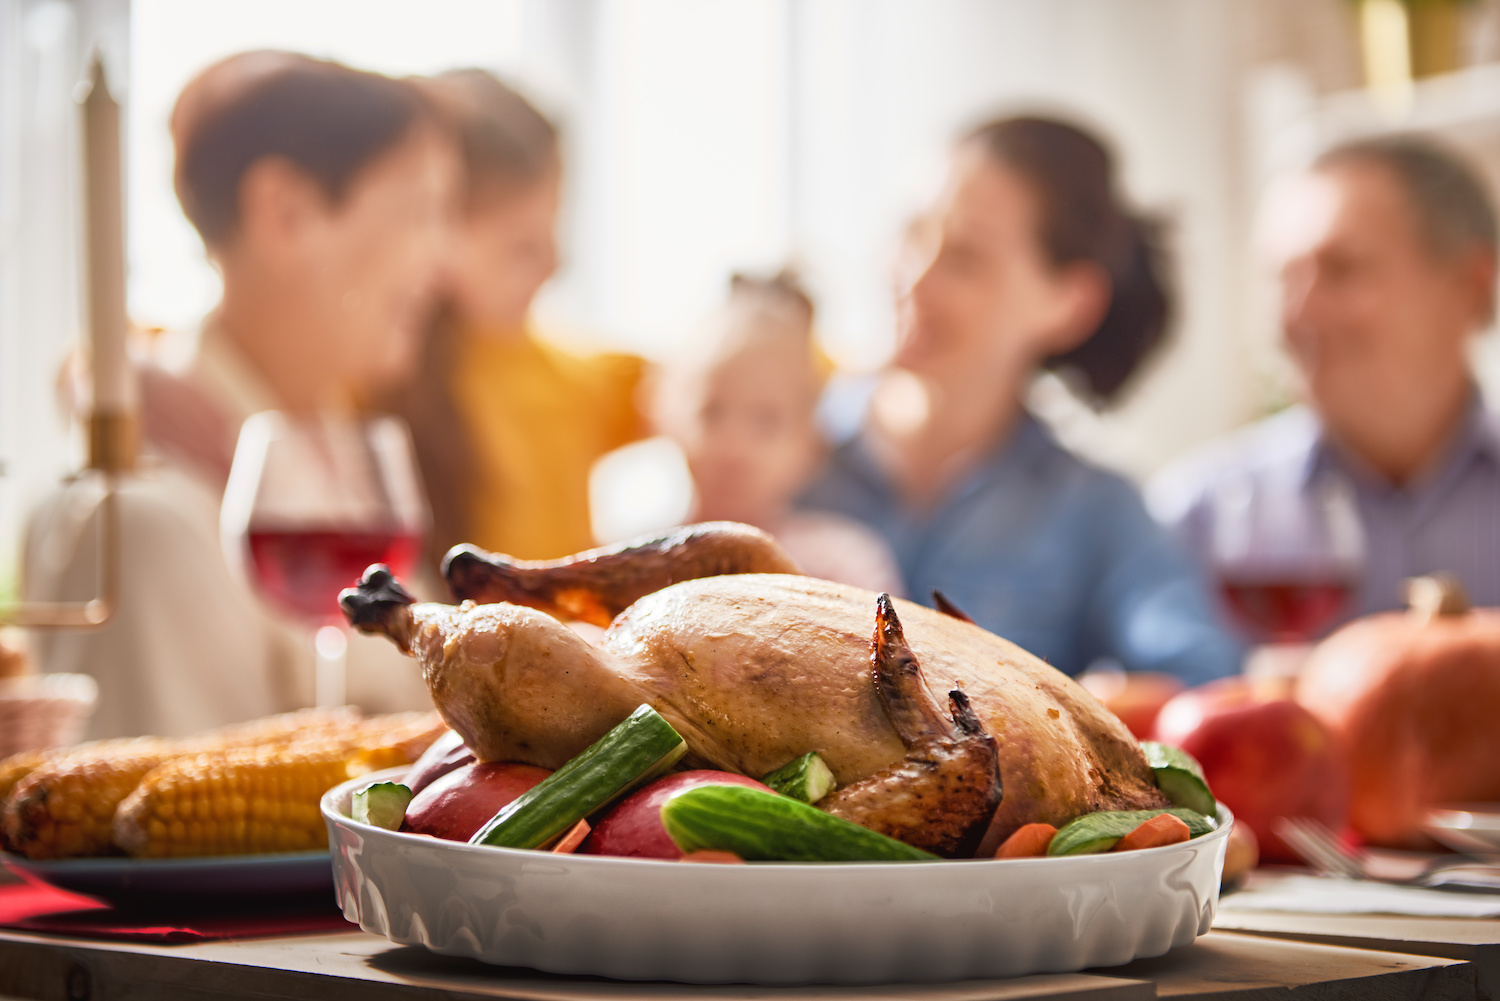 Could Thanksgiving Dinner Really Make You Look Better?